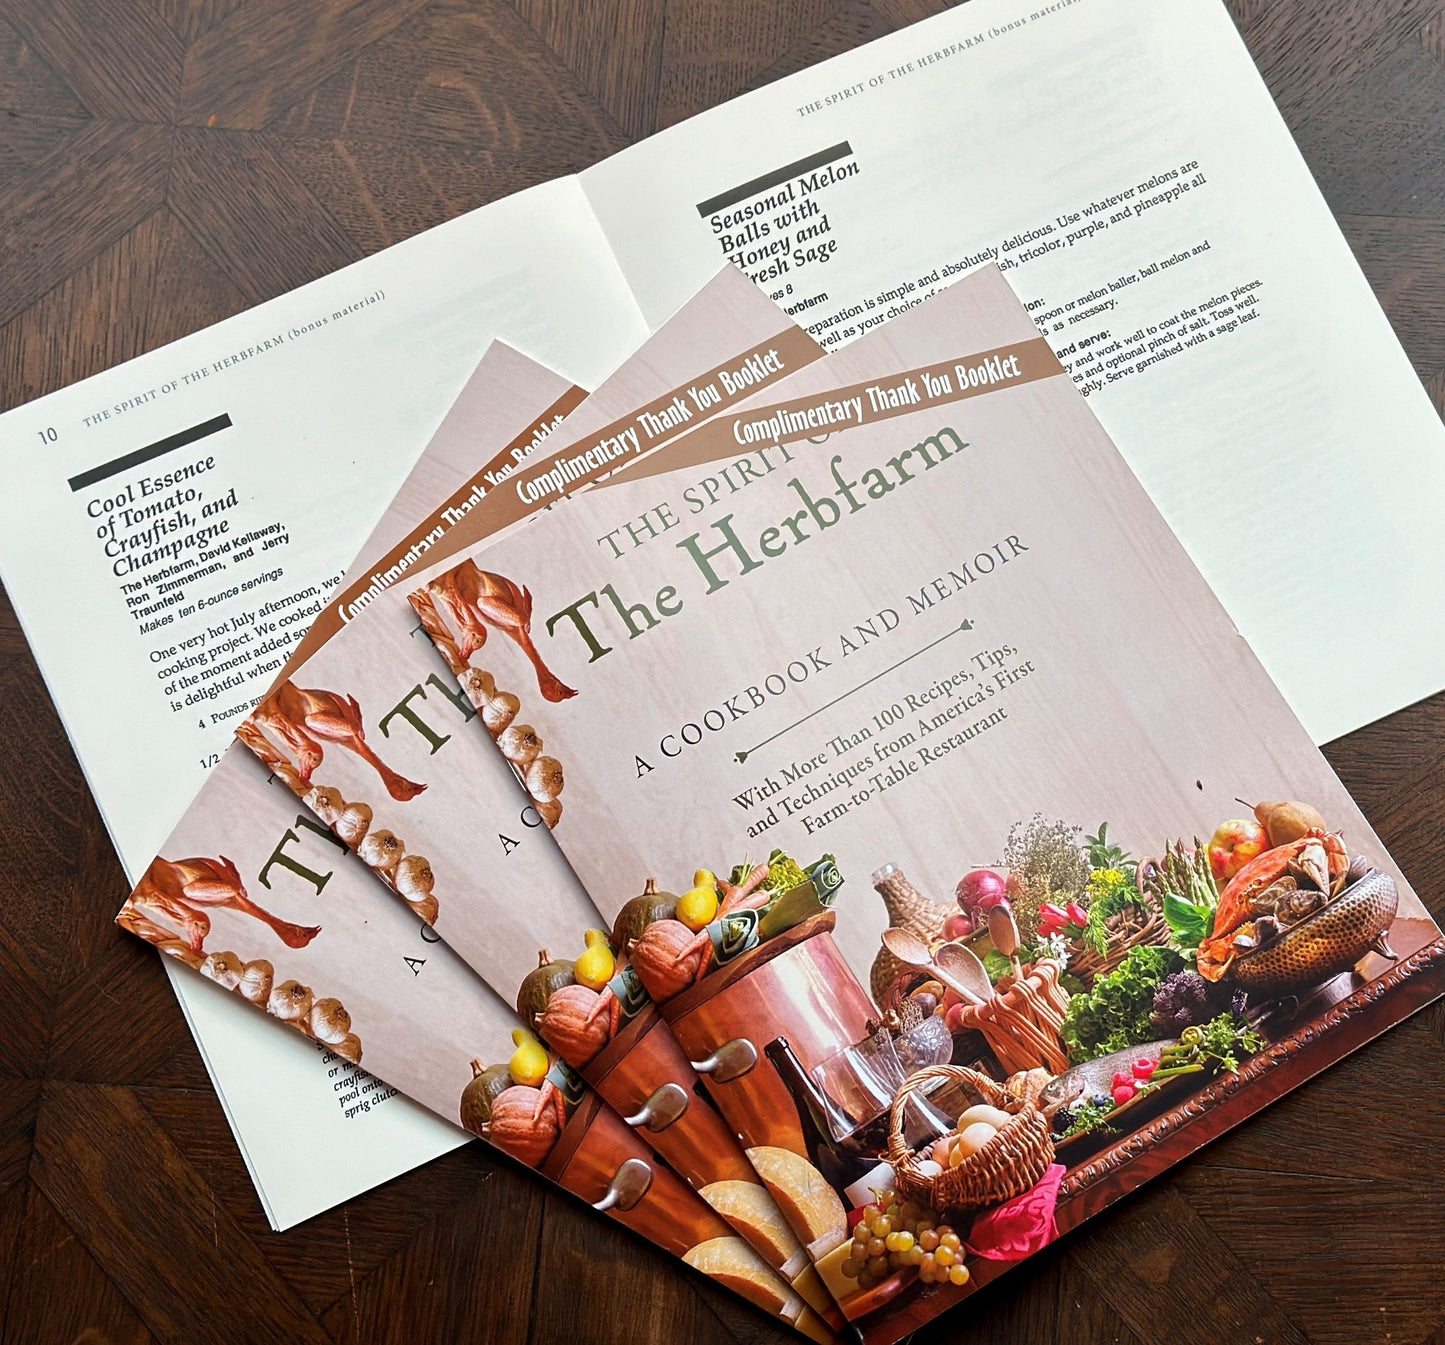 The Spirit of The Herbfarm Restaurant - A Cookbook and Memoir by Ron Zimmerman